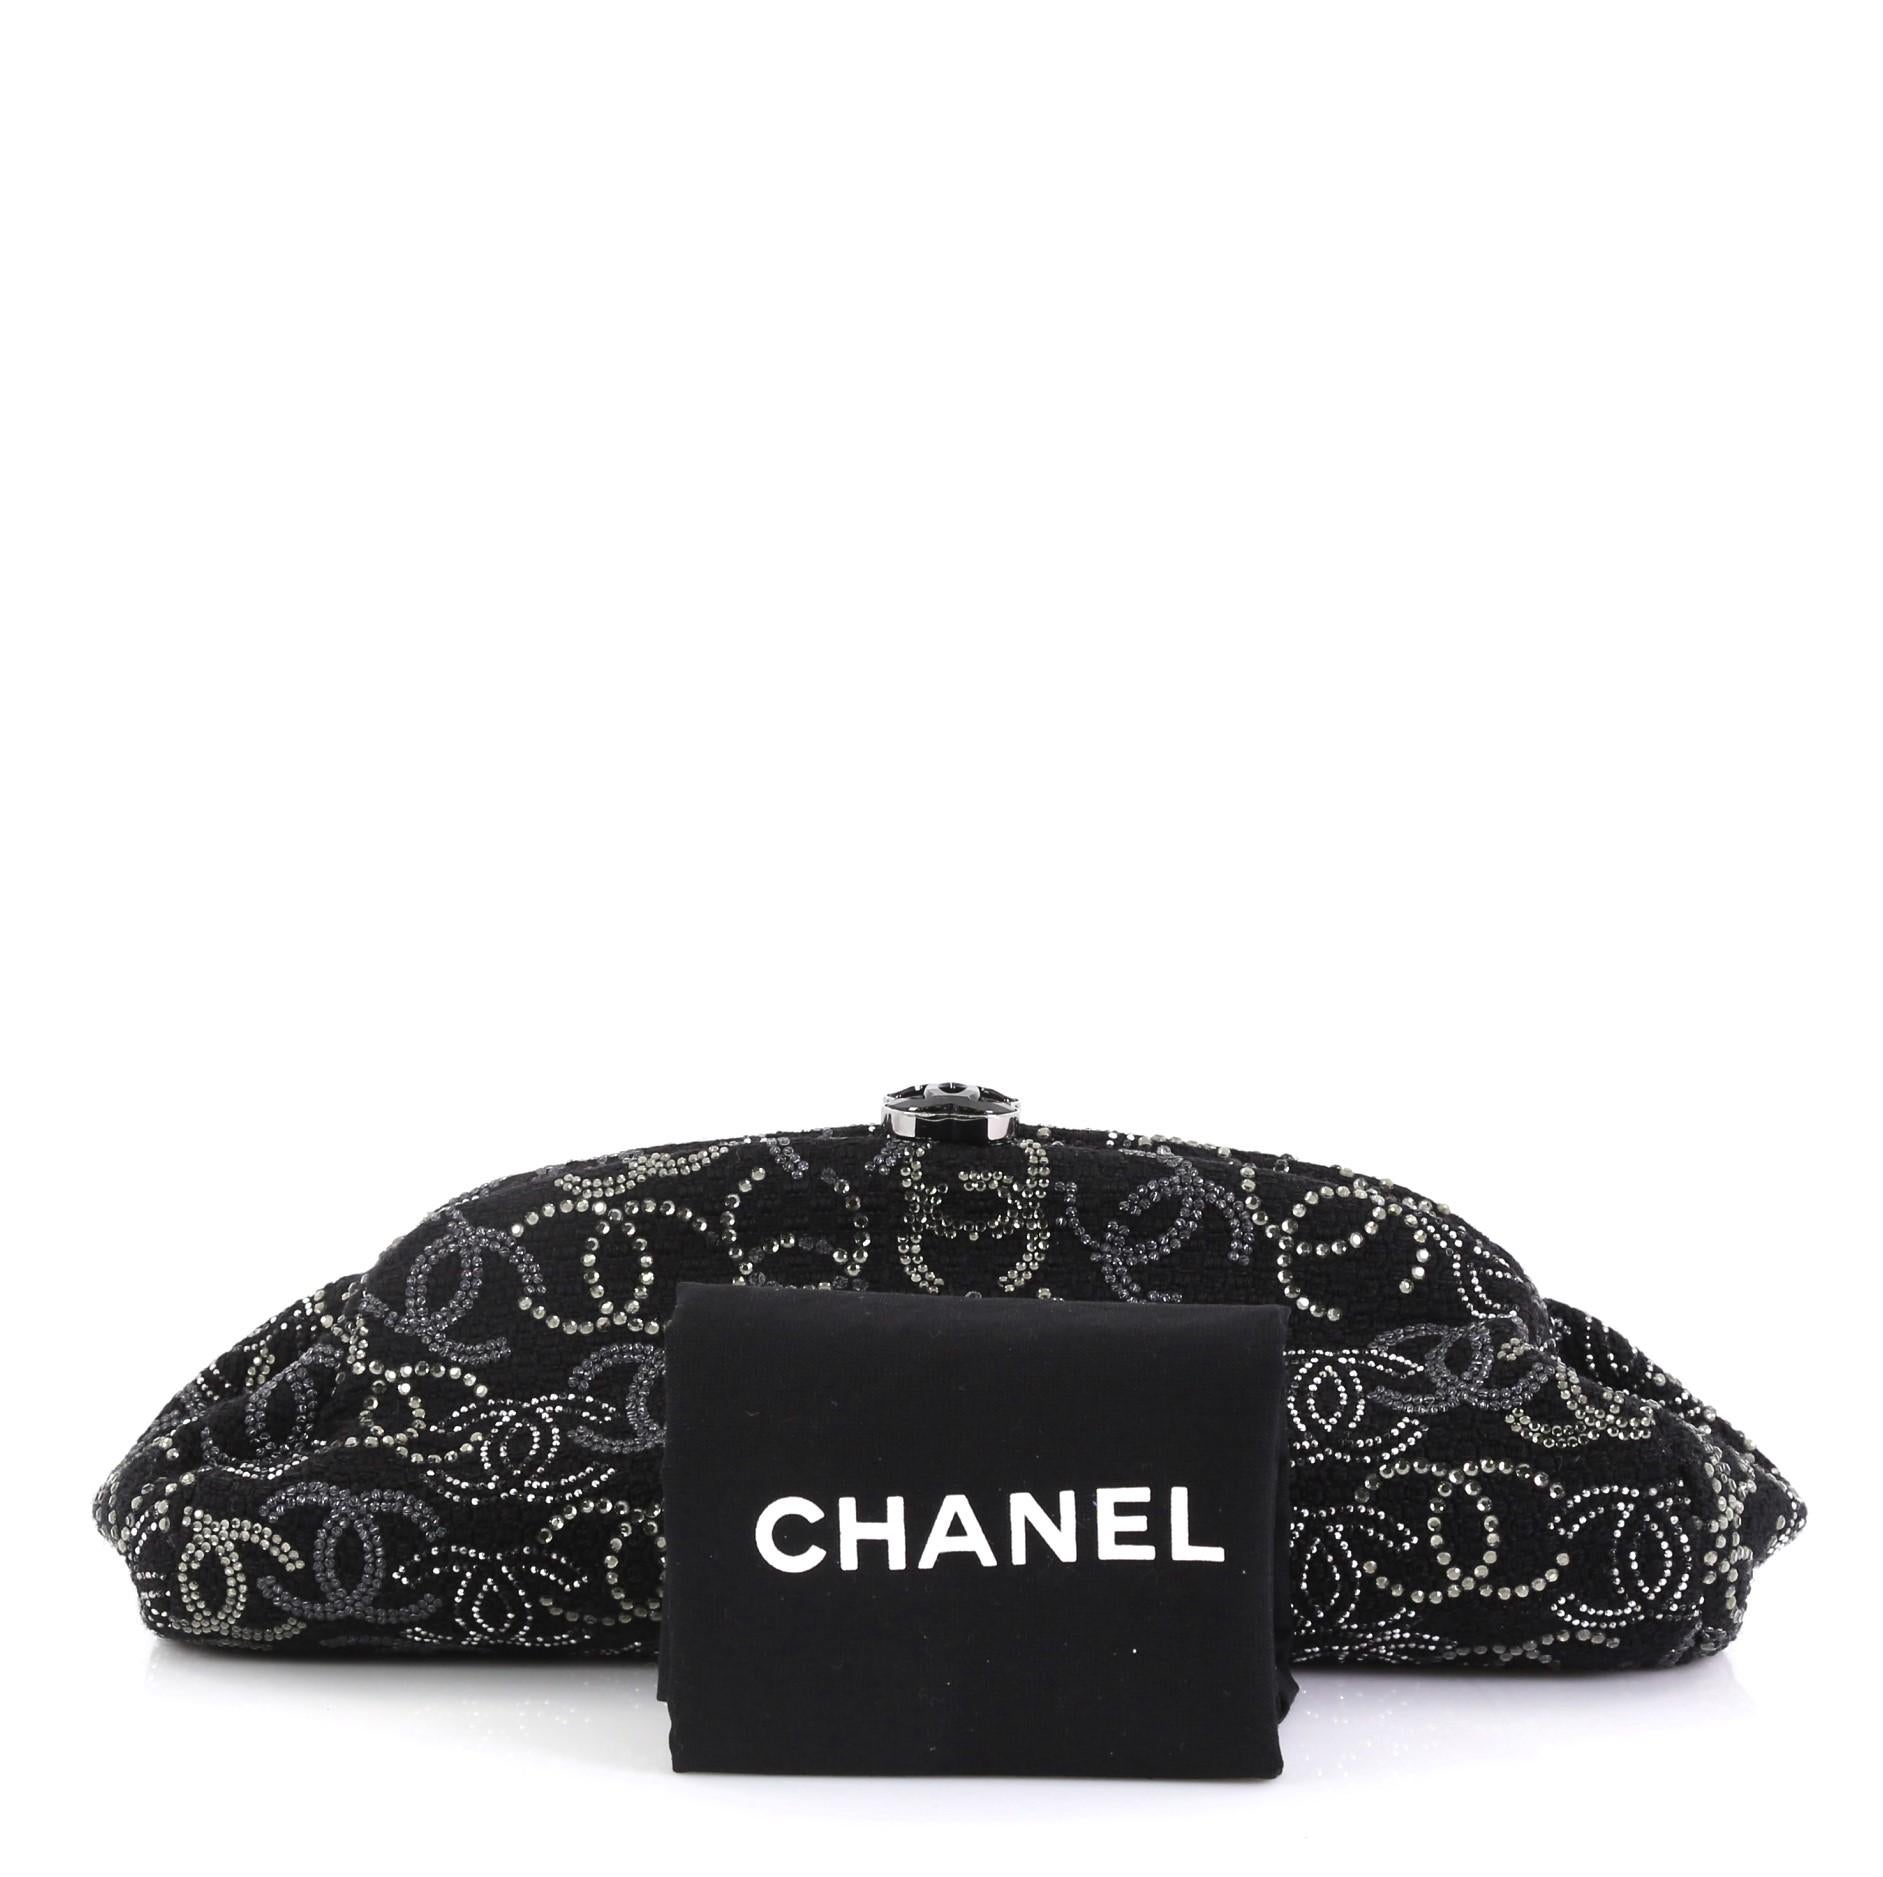 This Chanel Paris-Shanghai Frame Clutch Crystal Embellished Boucle Tweed, crafted from black crystal embellished tweed, features framed silhouette and gunmetal-tone hardware. It opens to a black satin interior with zip pocket. Hologram, sticker